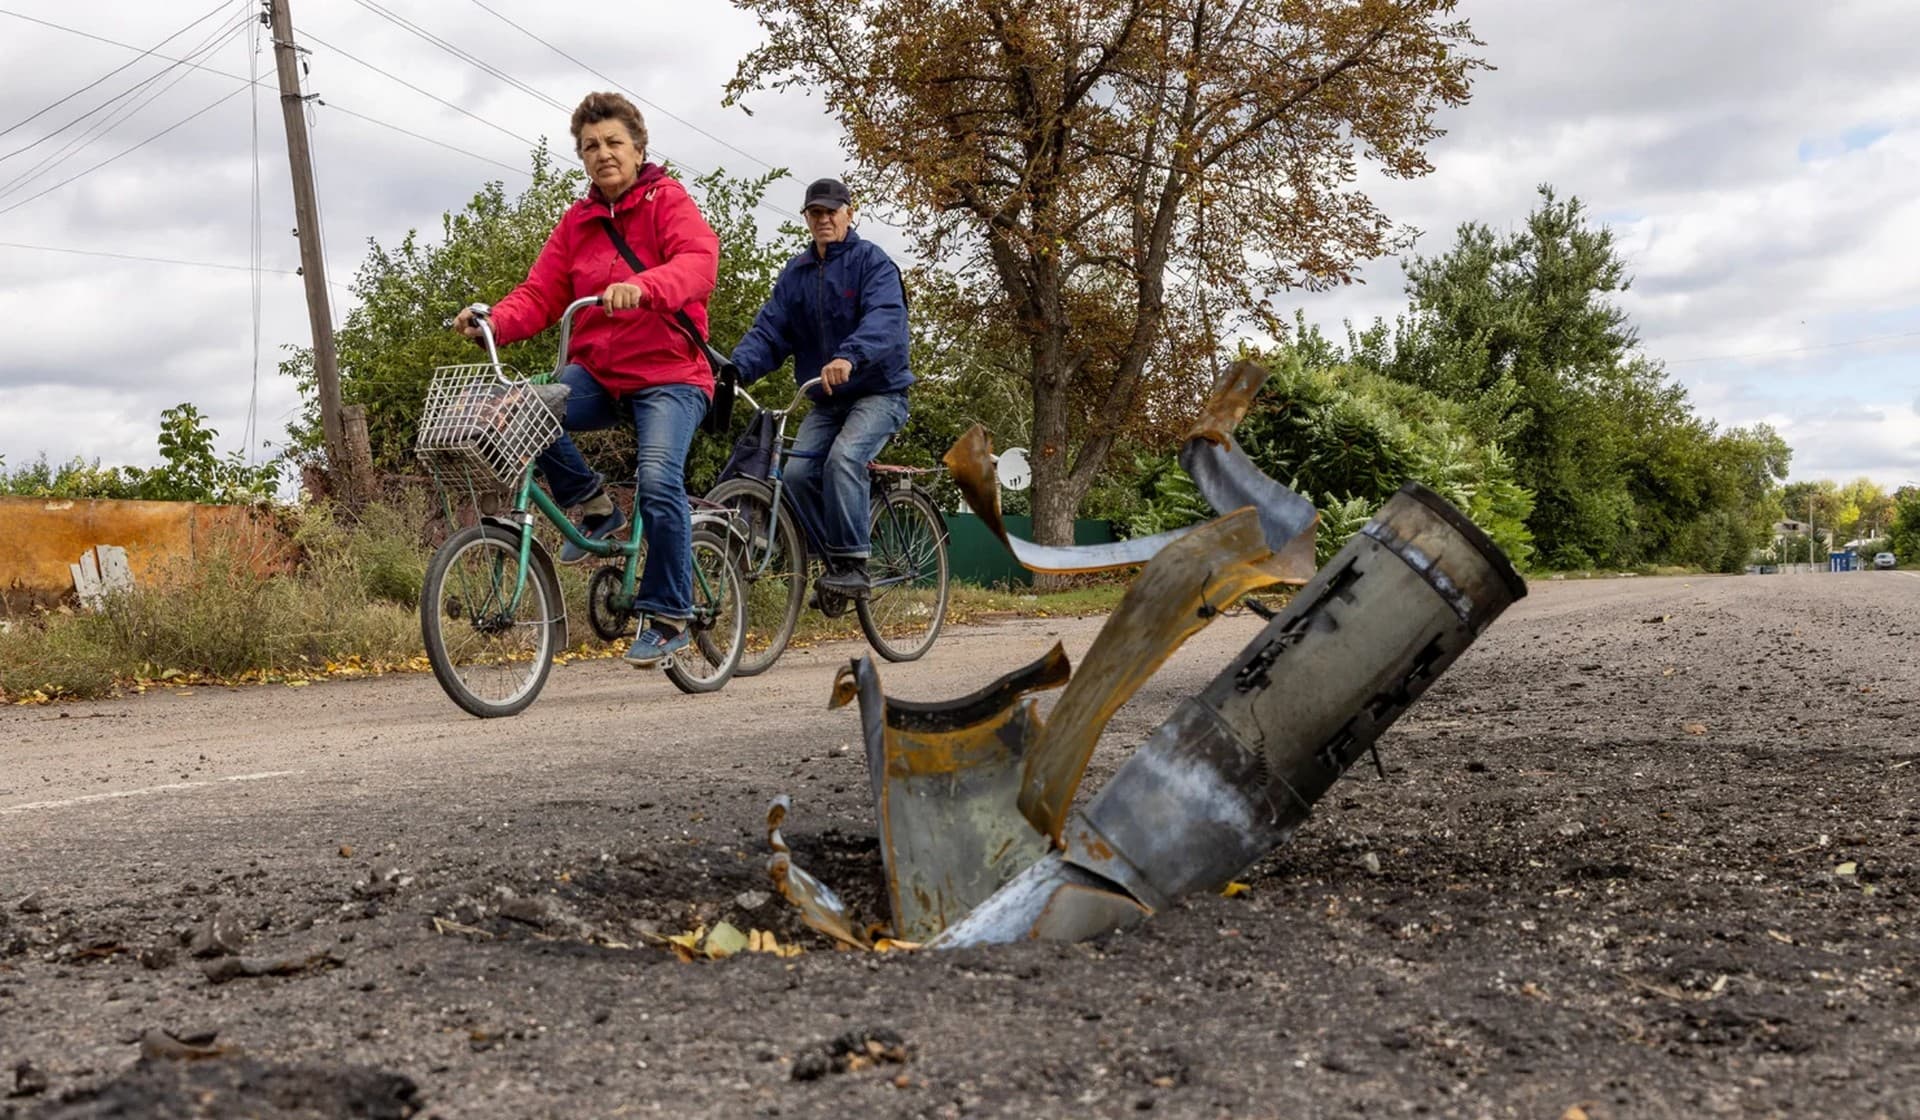 Locals ride past an exploded missile on a main road in the town of Balakliia